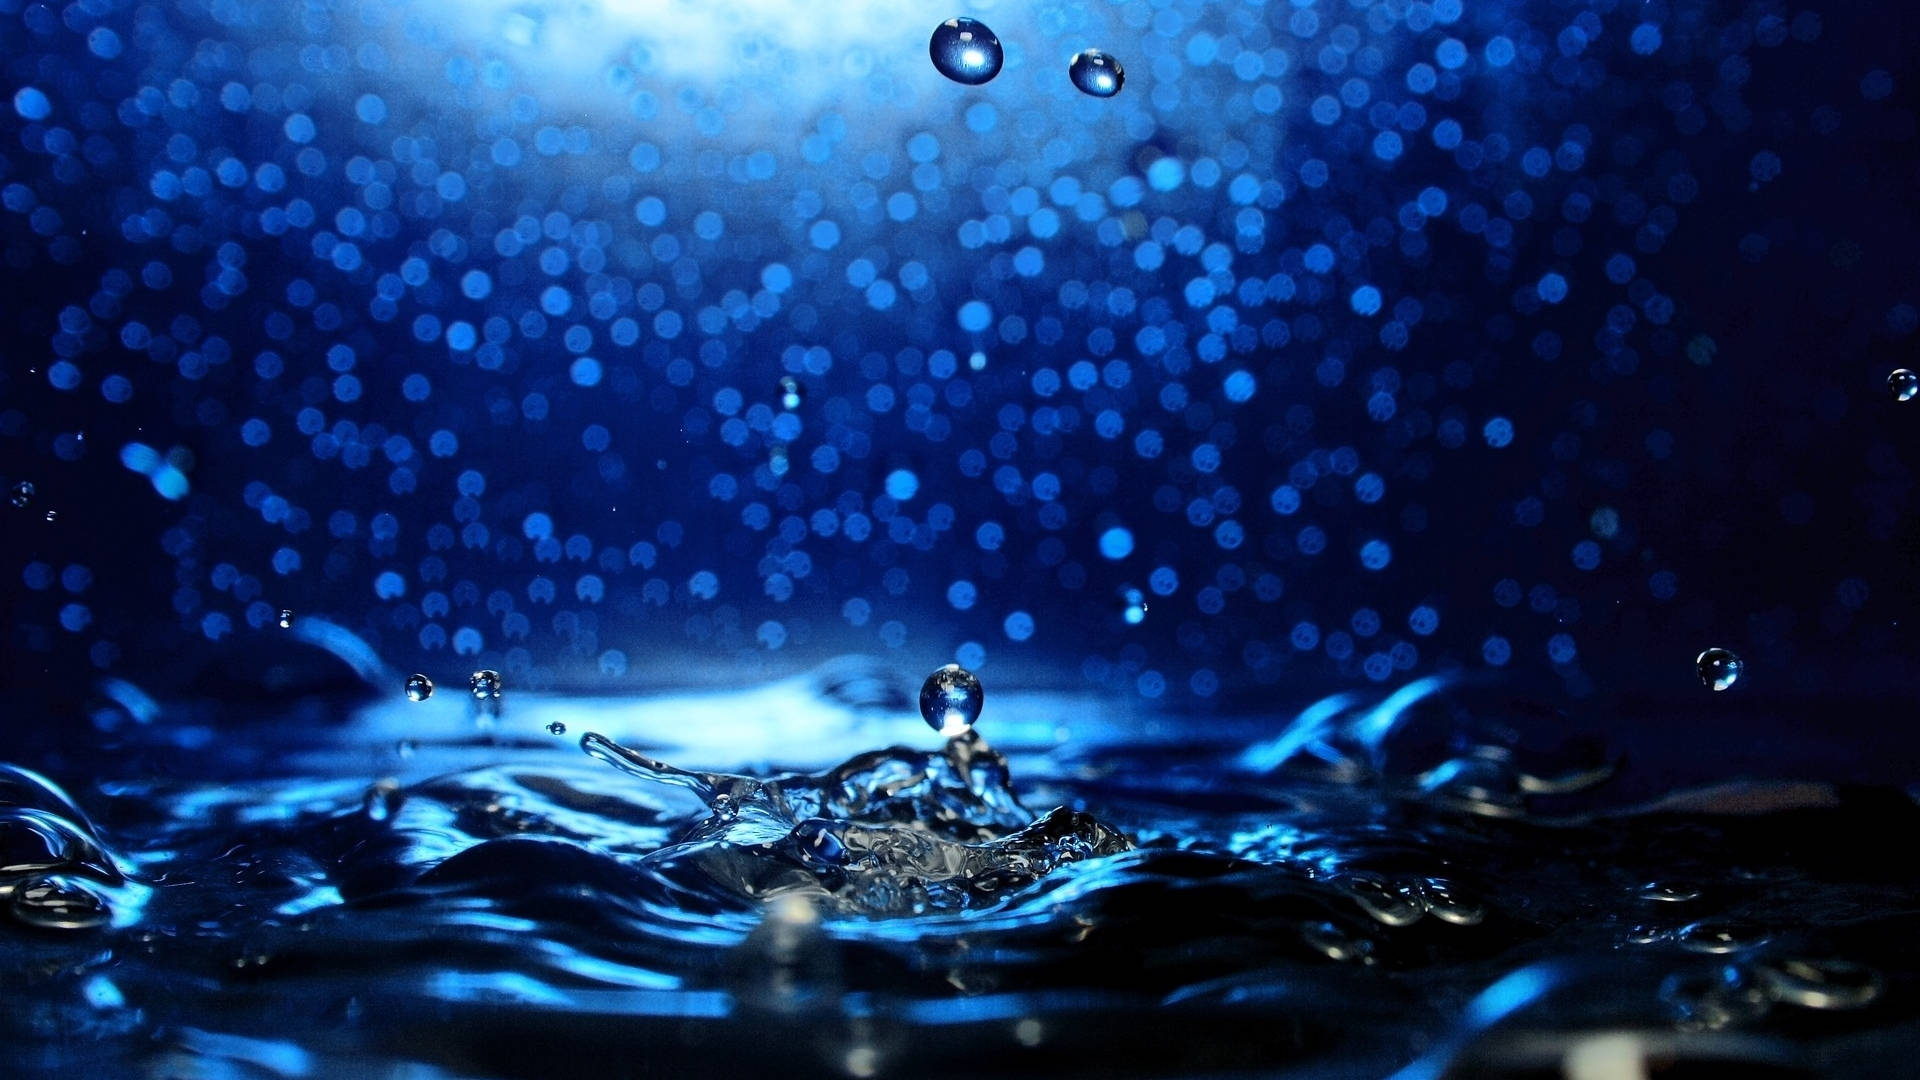 Cool 3d Water Imagery Wallpaper